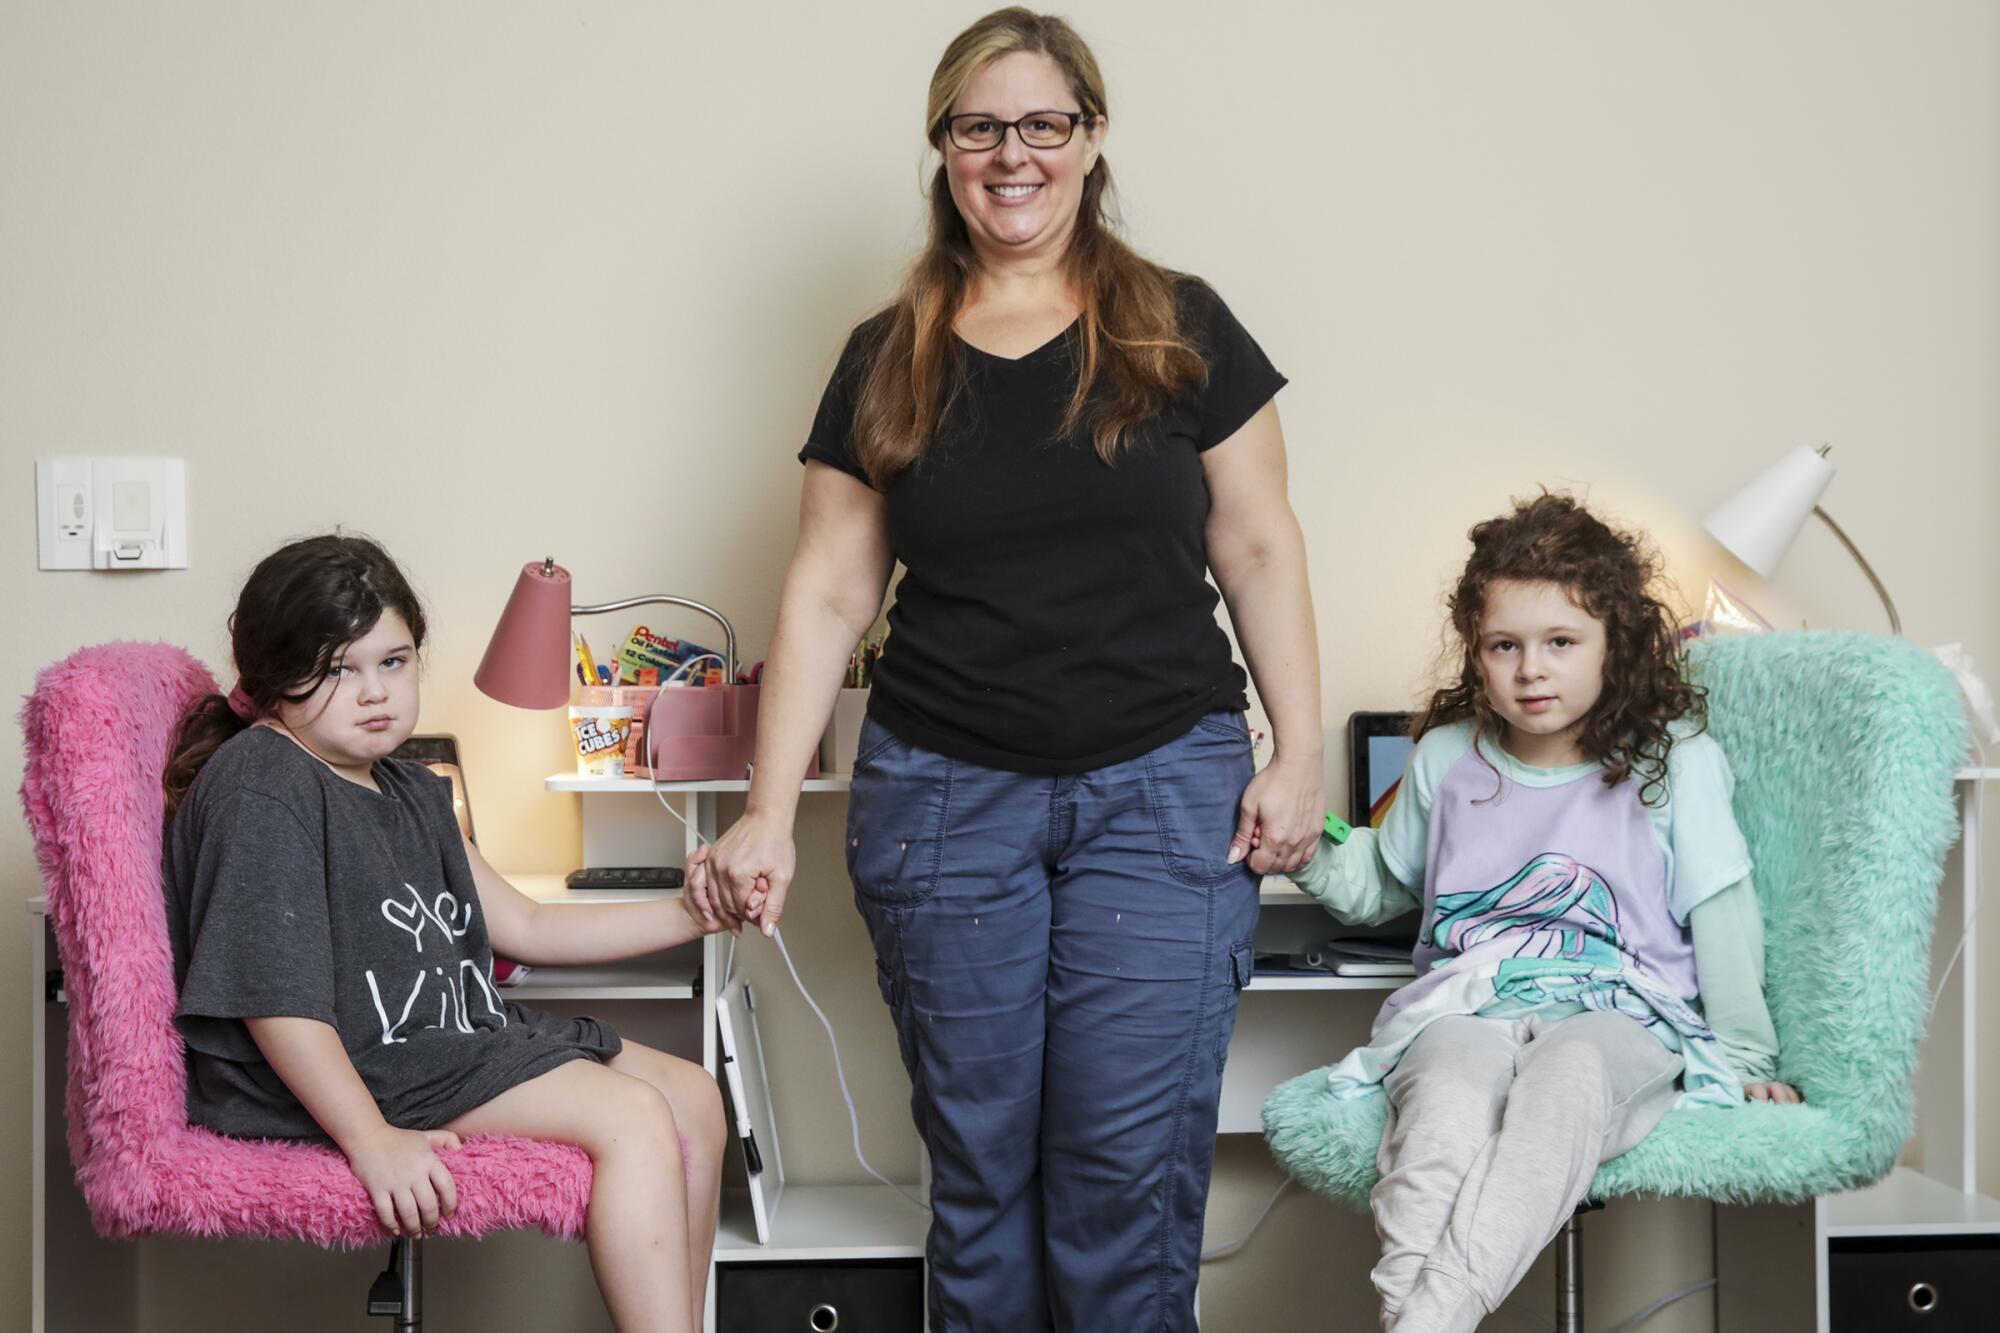 Alison Goldberg, 43, stands for a portrait with her 7-year-old twins Savannah Singer and Madelynn Singer at home.